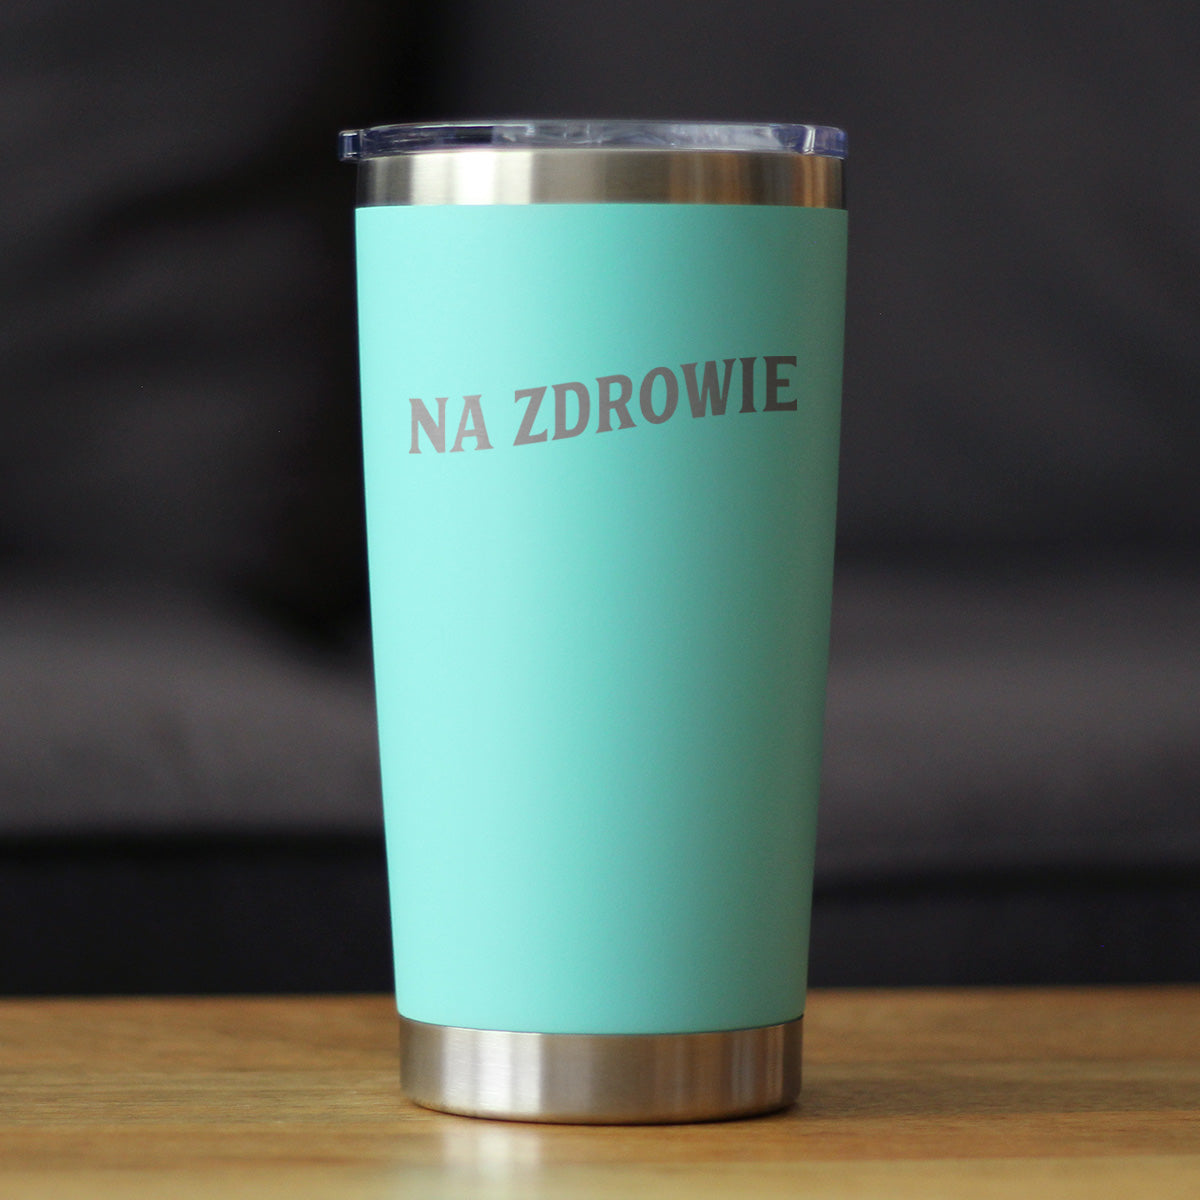 Na Zdrowie - Polish Cheers - Insulated Coffee Tumbler Cup with Sliding Lid - Stainless Steel Insulated Mug - Cute Poland Themed Gifts or Party Decor for Women and Men